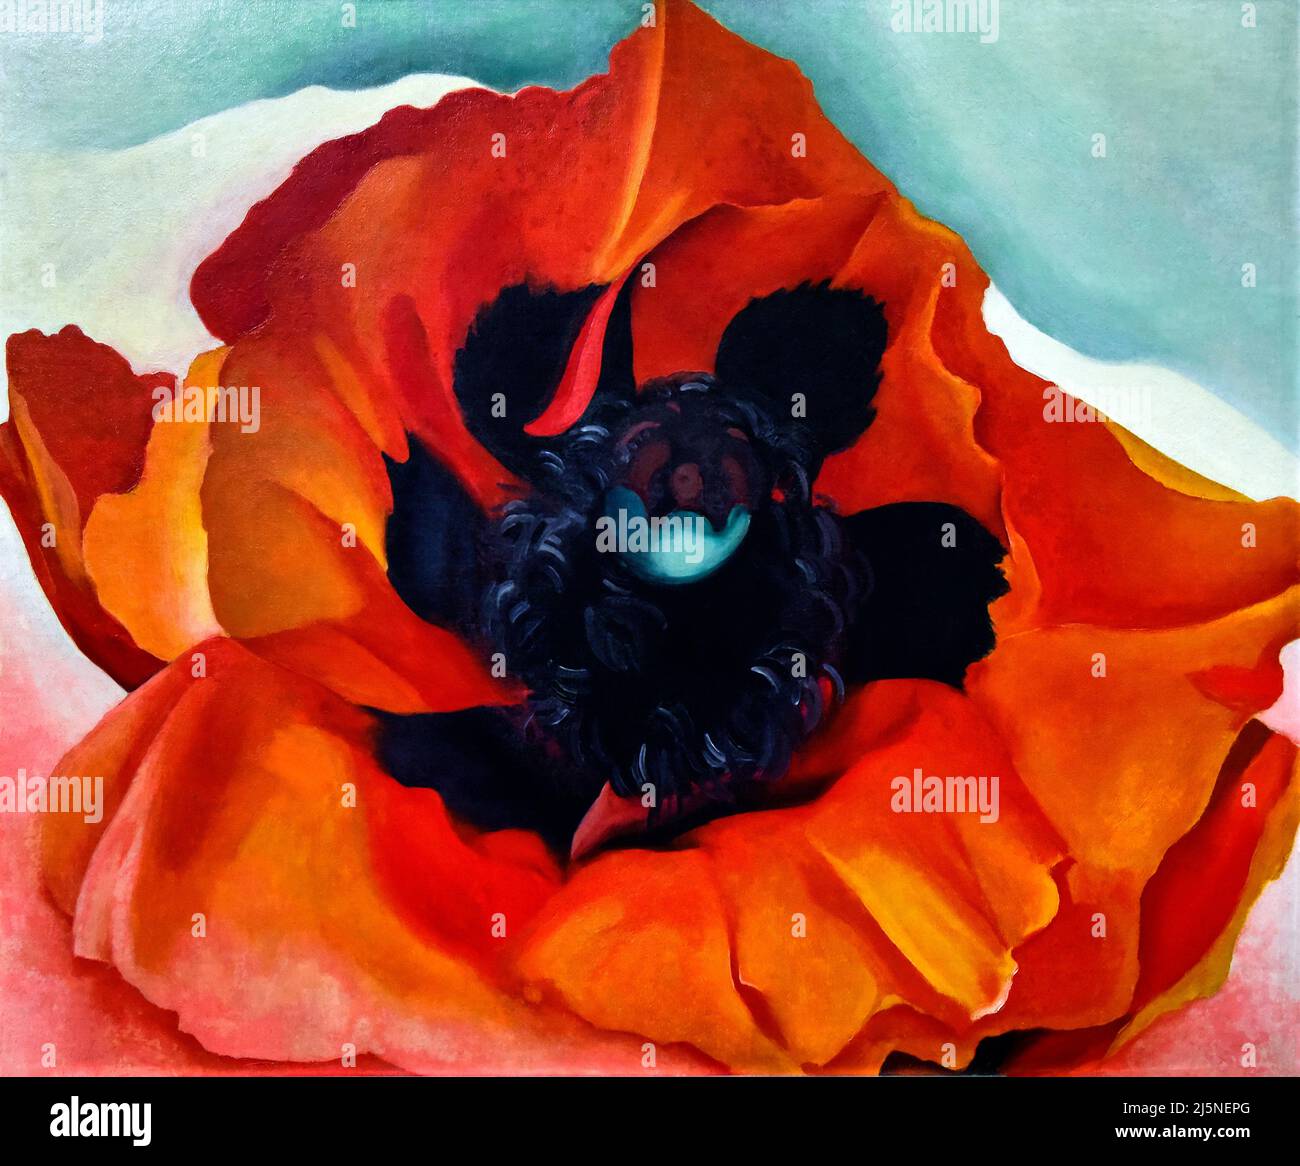 Georgia Okeeffe Painting, Poppy, 1927, Oil on Canvas. On display at the St. Petersburg Museum of Fine Arts. Stock Photo